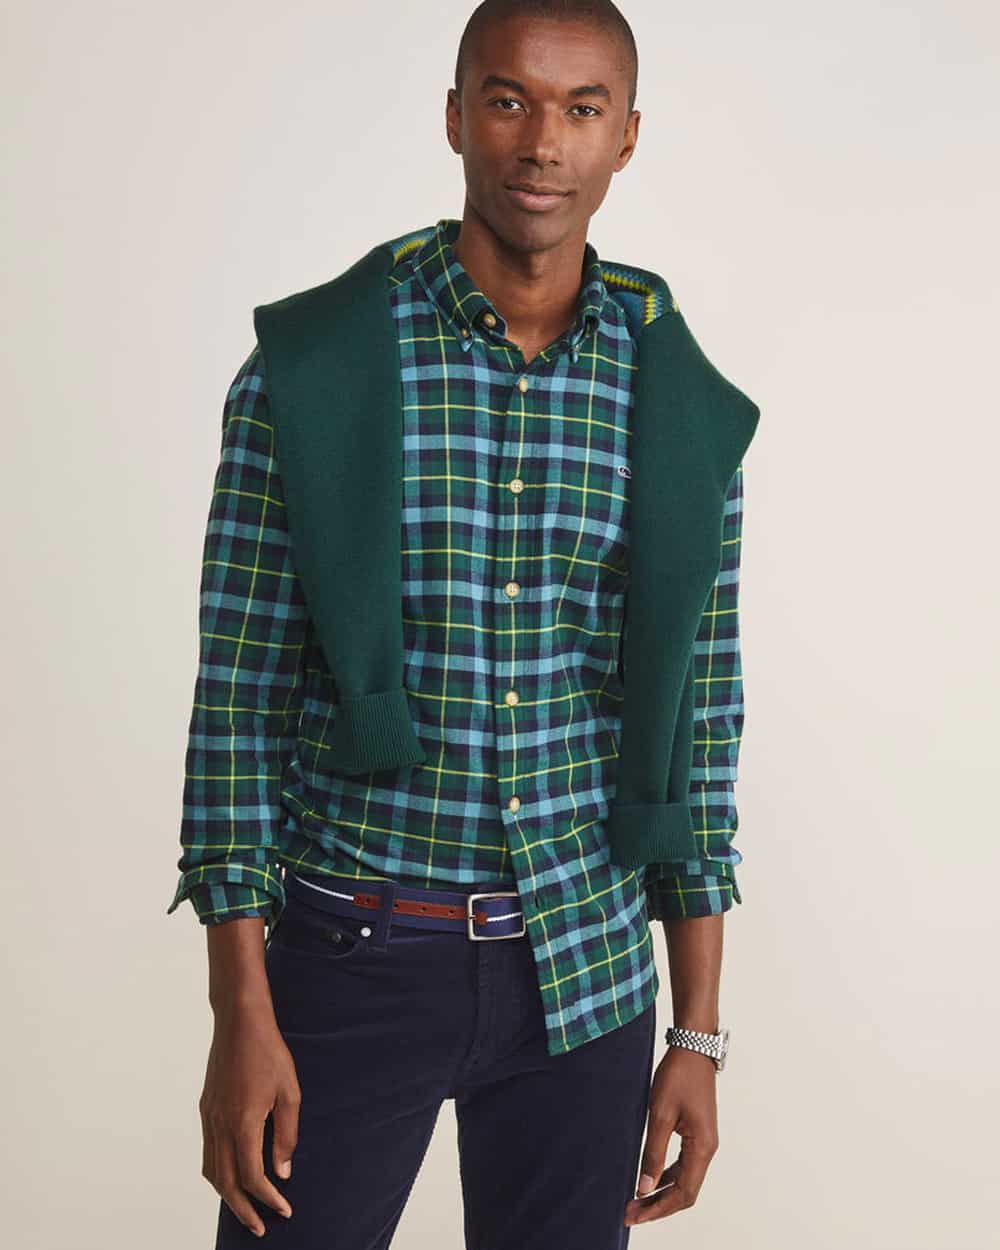 Man wearing Vineyard Vines navy pants, blue/green check shirt and green sweater over shoulders